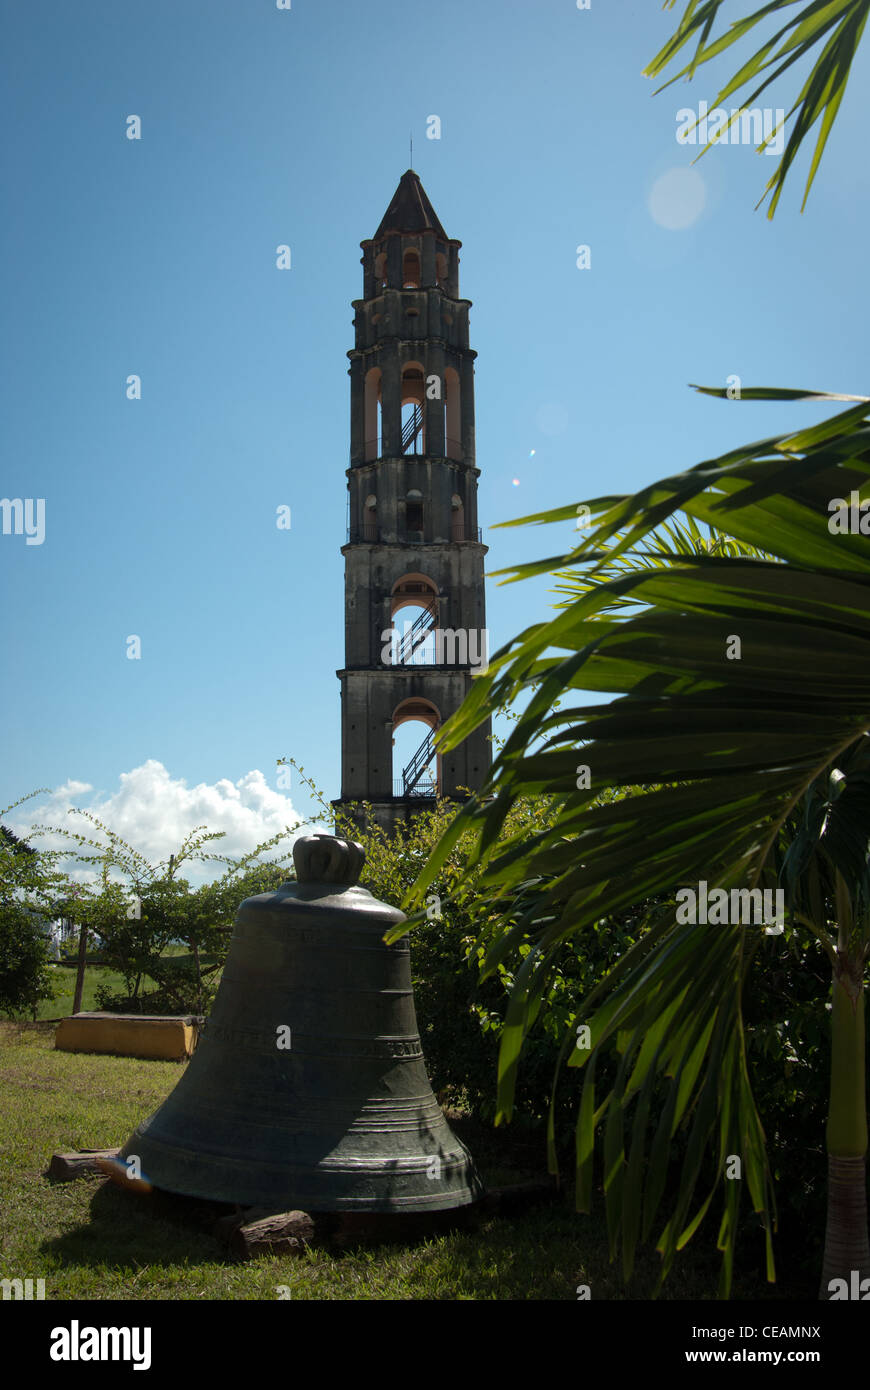 Iznaga tower bell and the tower in the background  in the Valle de los Ingenios, Sancti-Spíritus province, Cuba Stock Photo